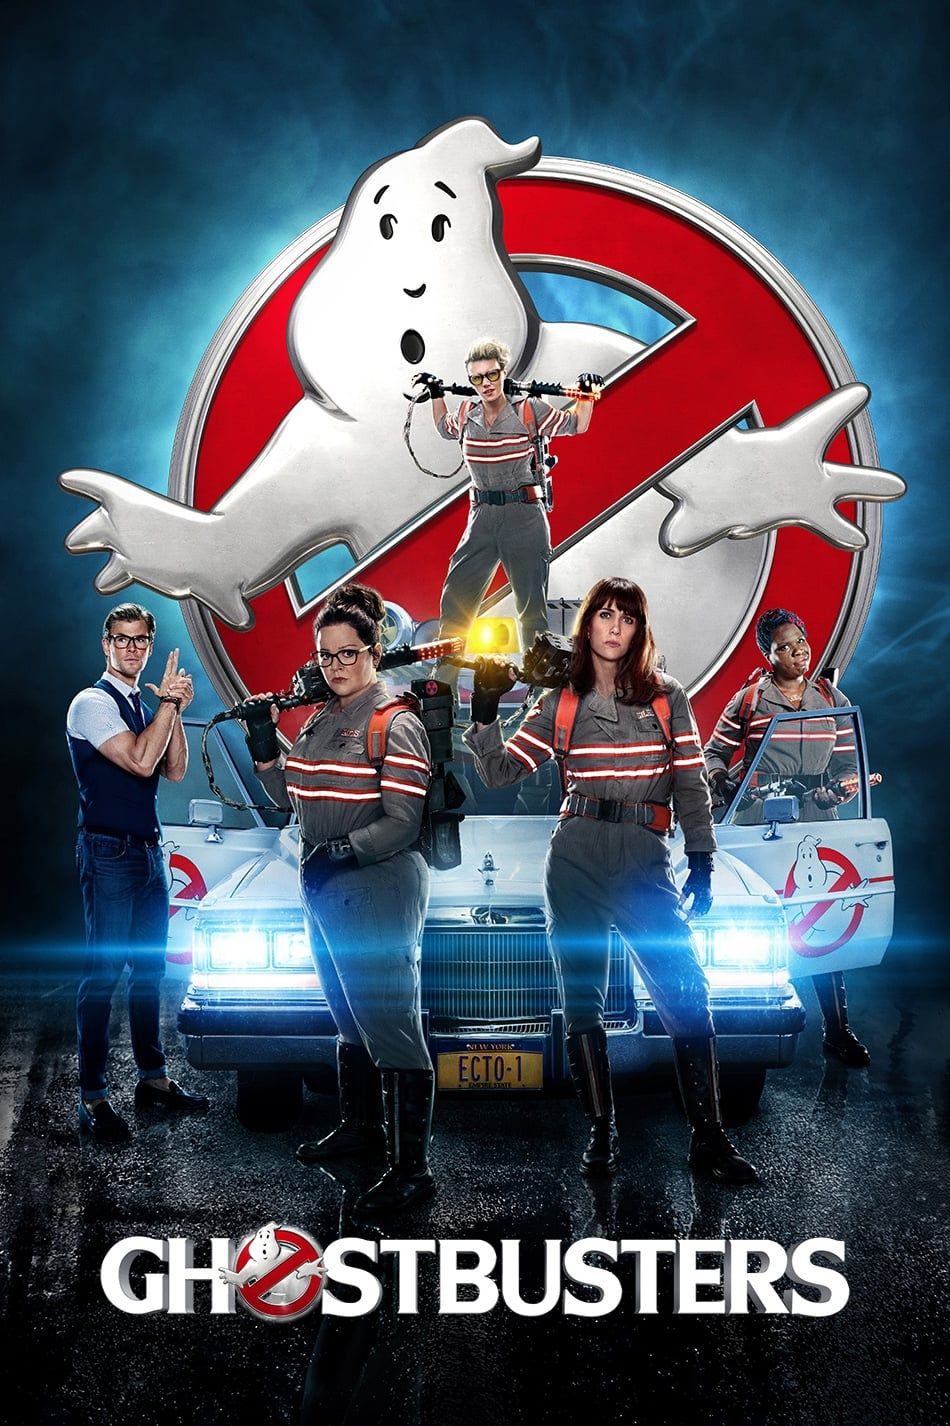 Ghostbusters 2016